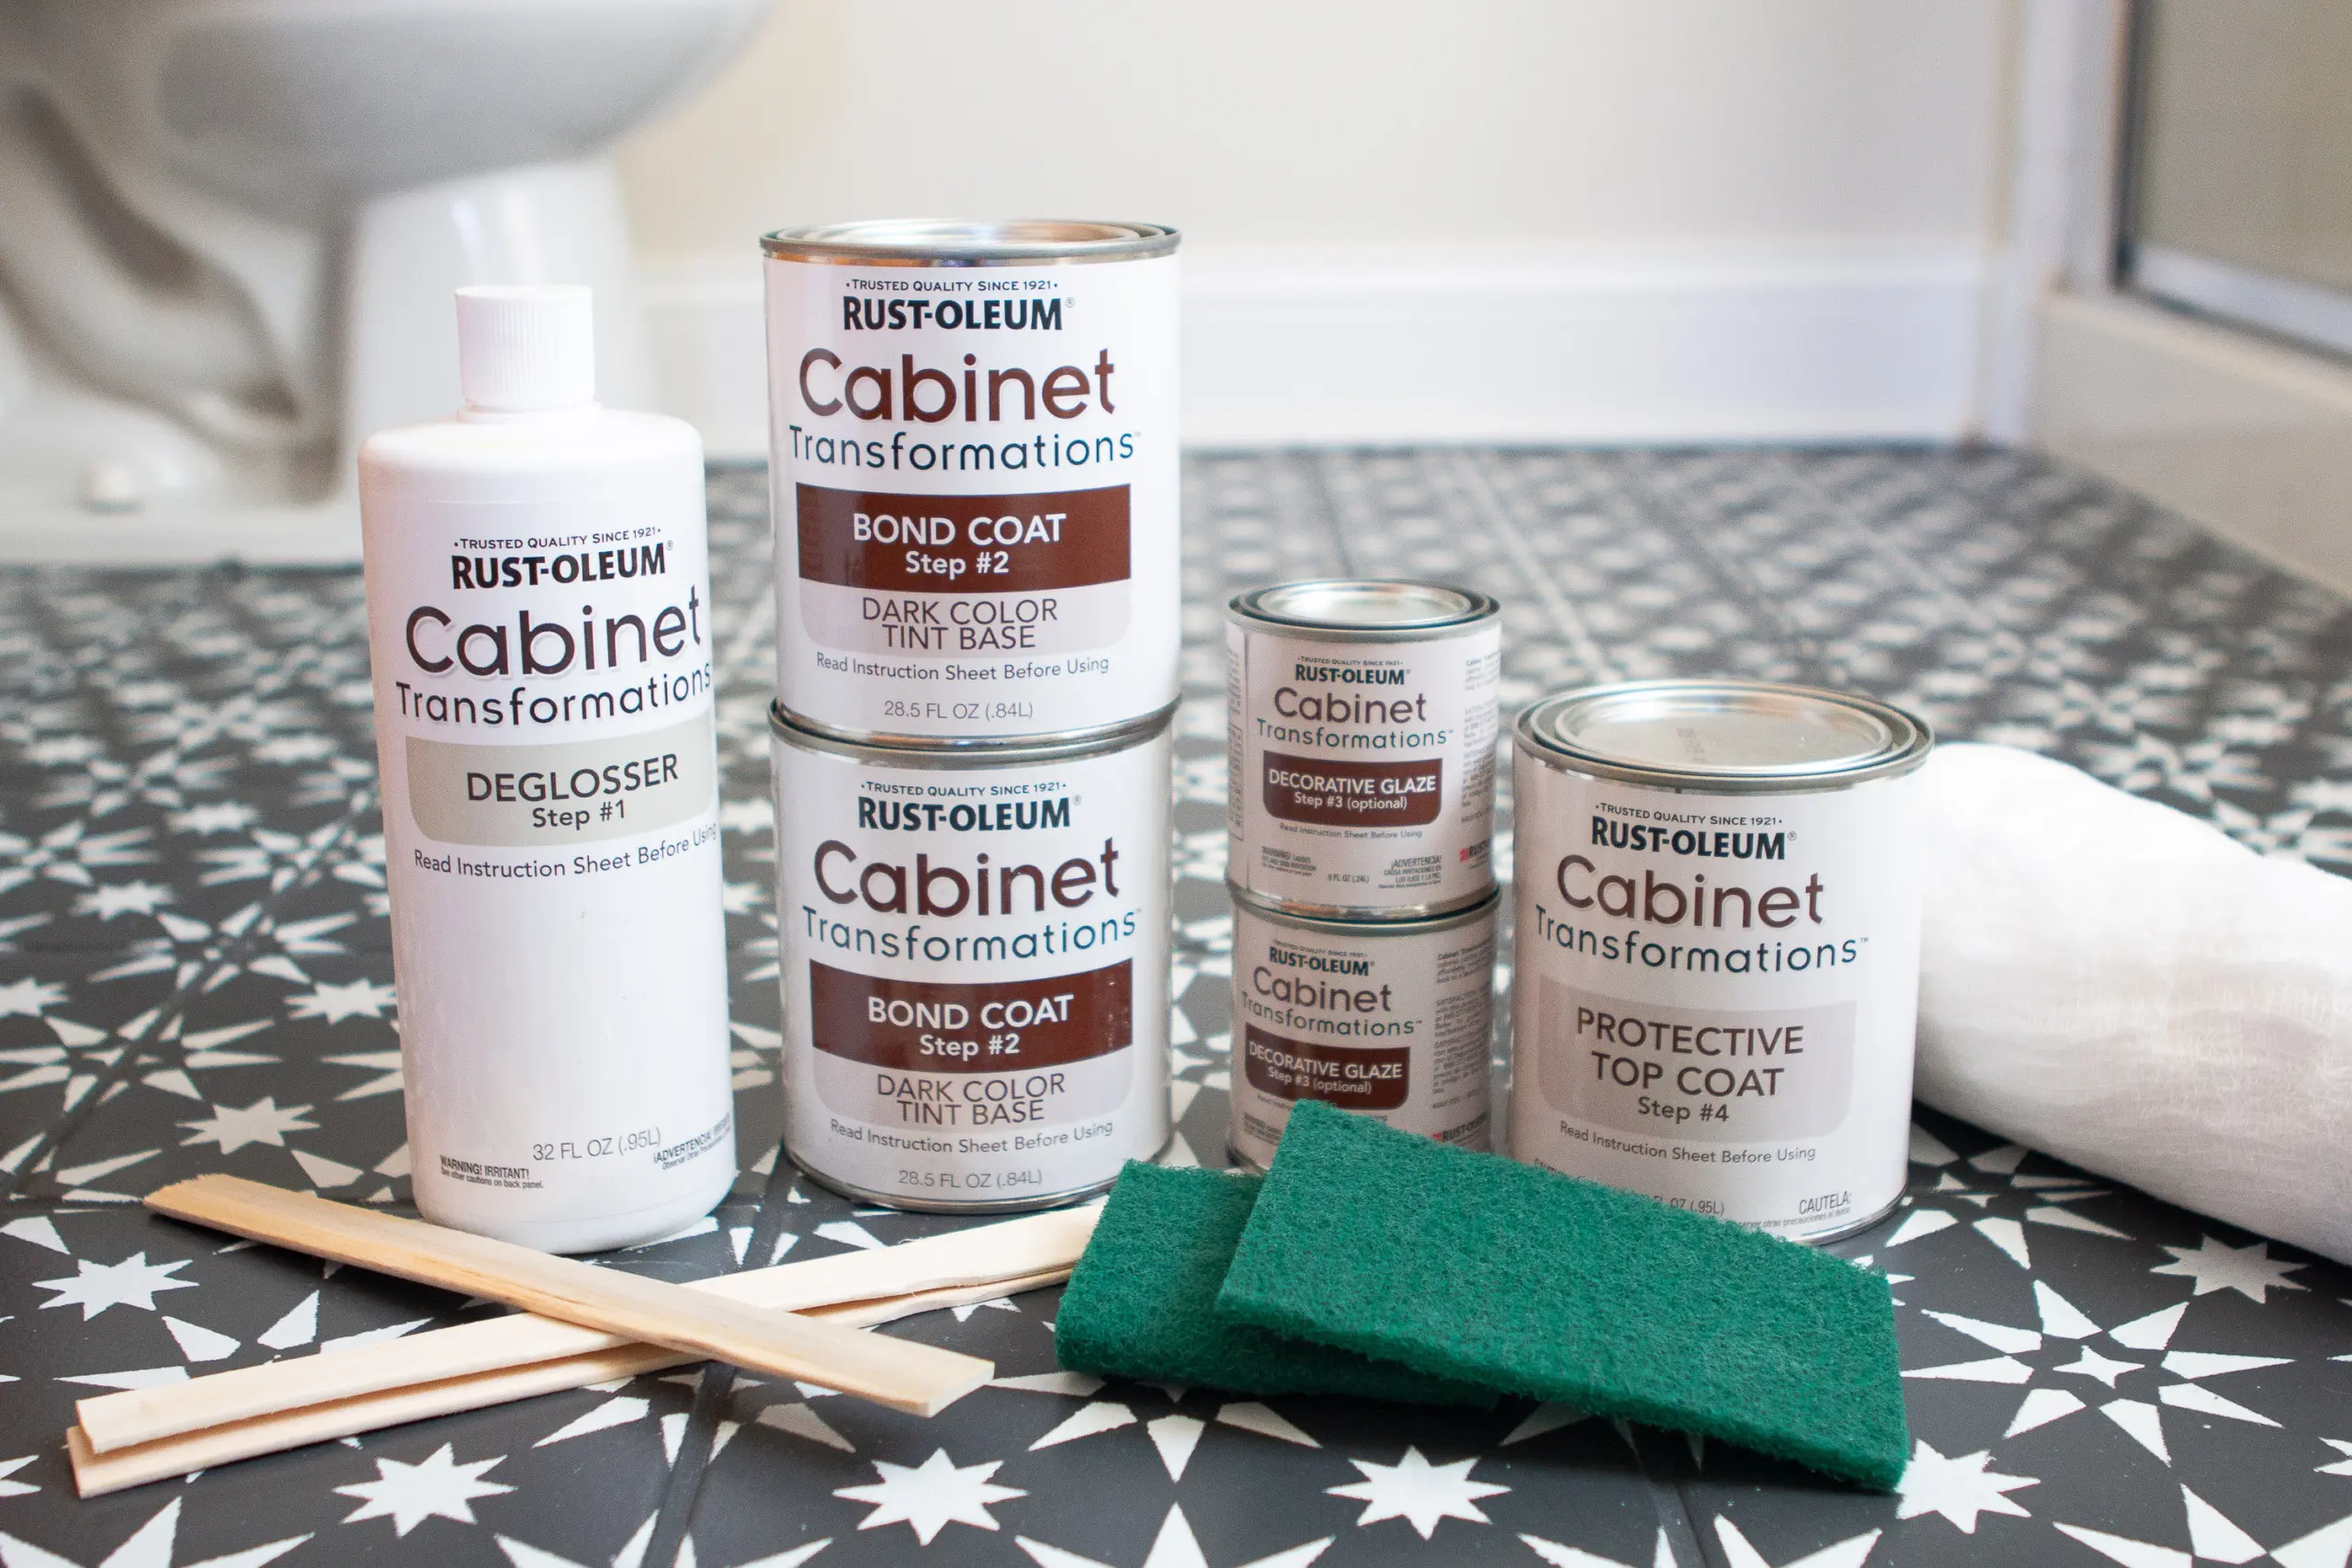 Everything comes in the cabinet transformations kit